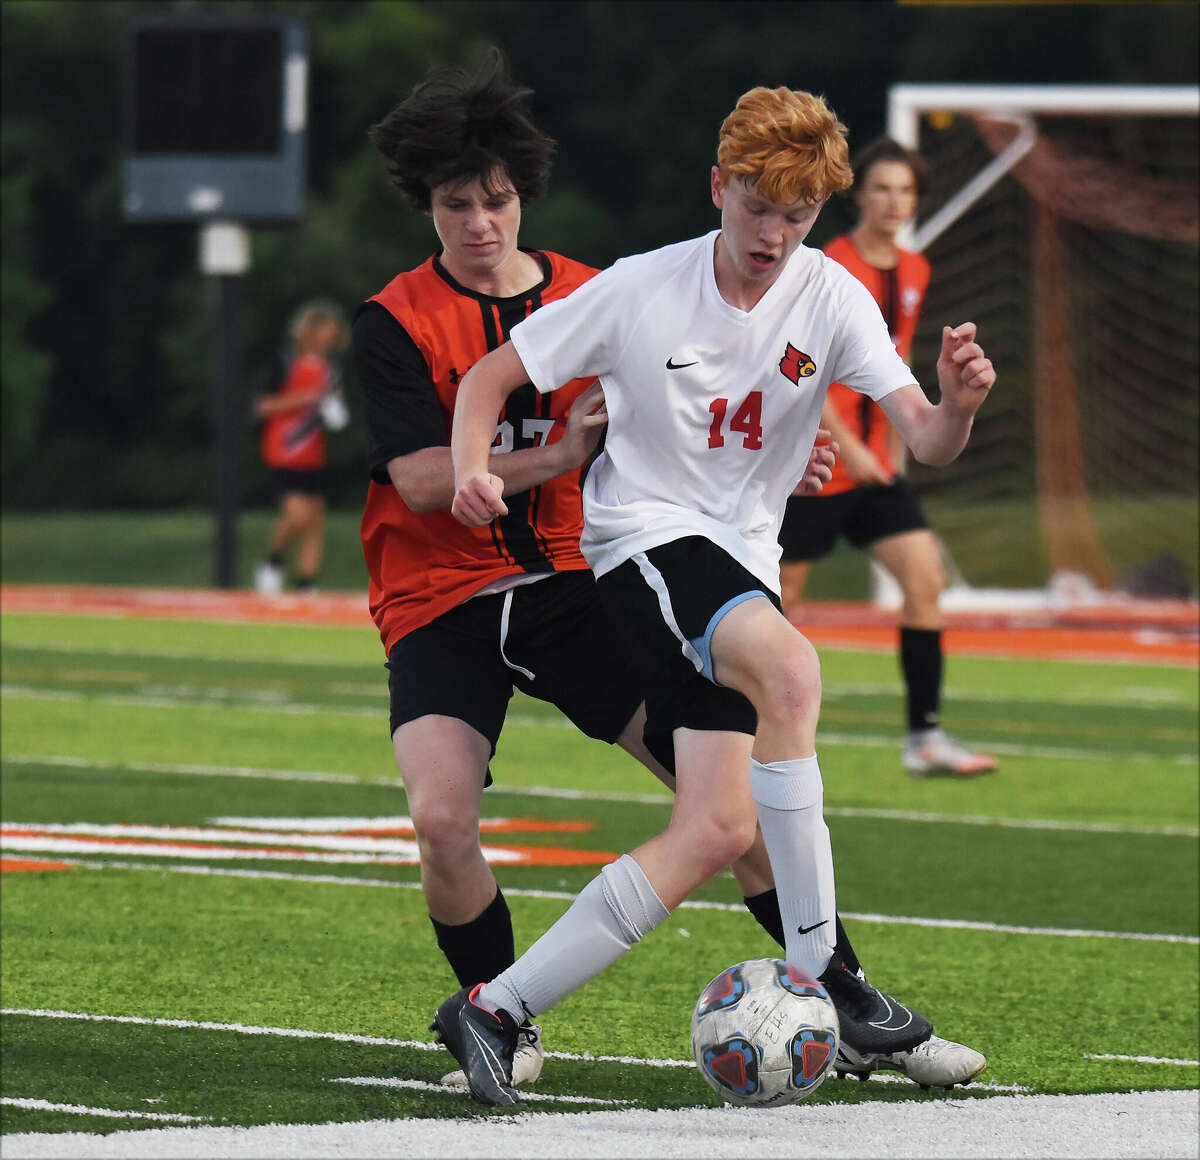 Alton's Alex Tuetken shields the ball from Edwardsville's Parker McMillian during Thursday's Southwestern Conference game inside the District 7 Sports Complex in Edwardsville.